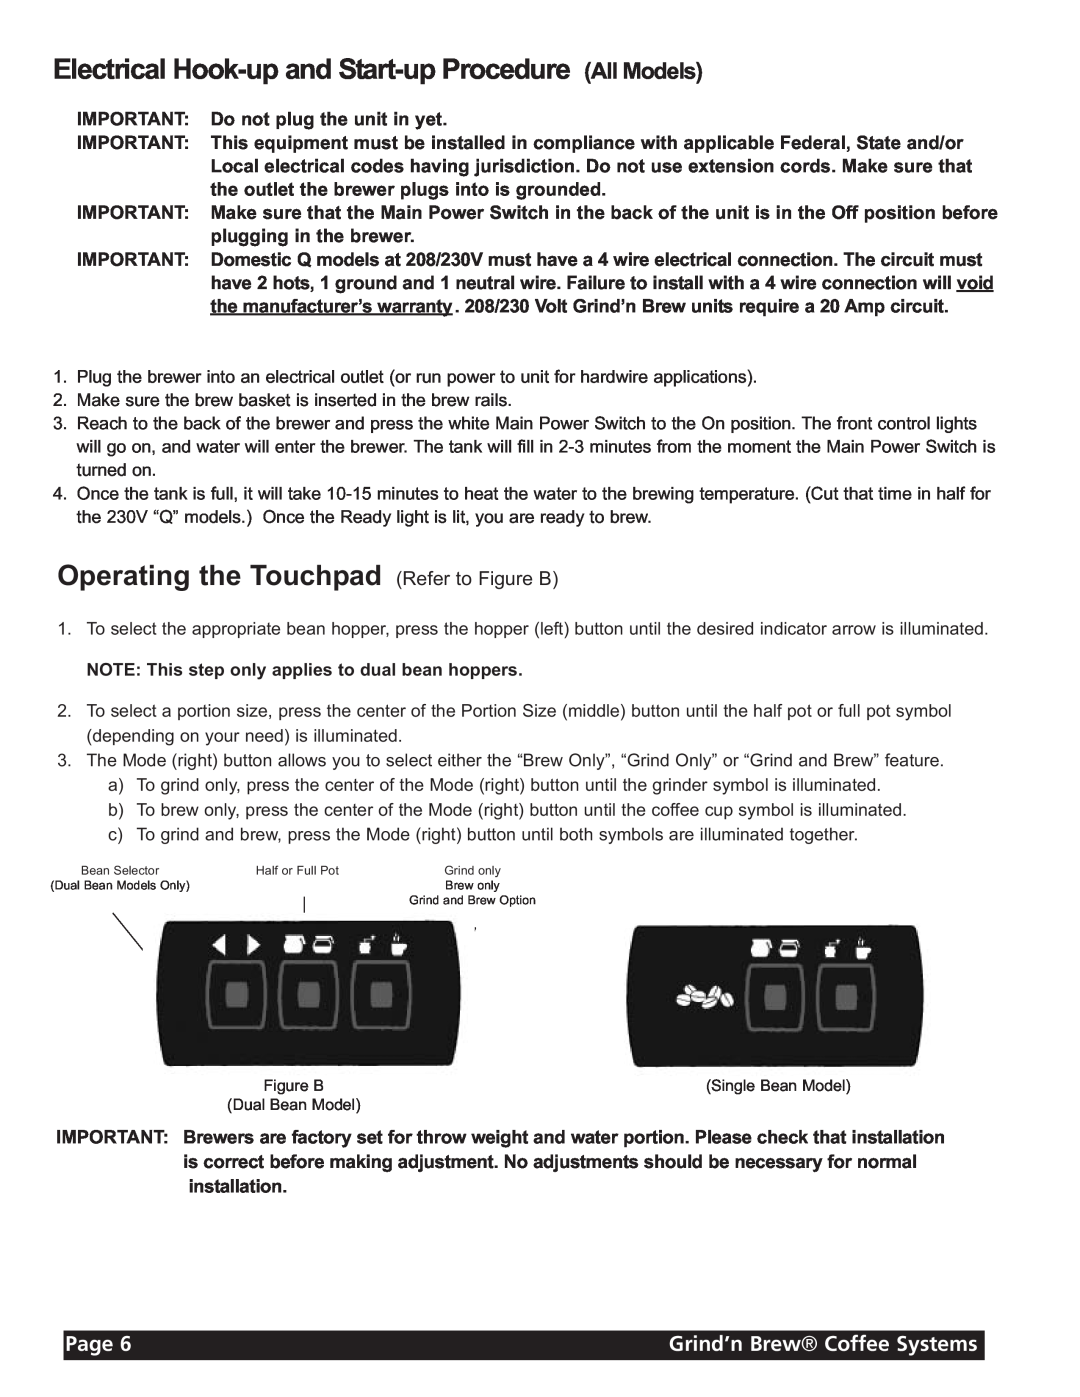 Grindmaster 11 Electrical Hook-up and Start-up Procedure All Models, Operating the Touchpad Refer to Figure B, Page 